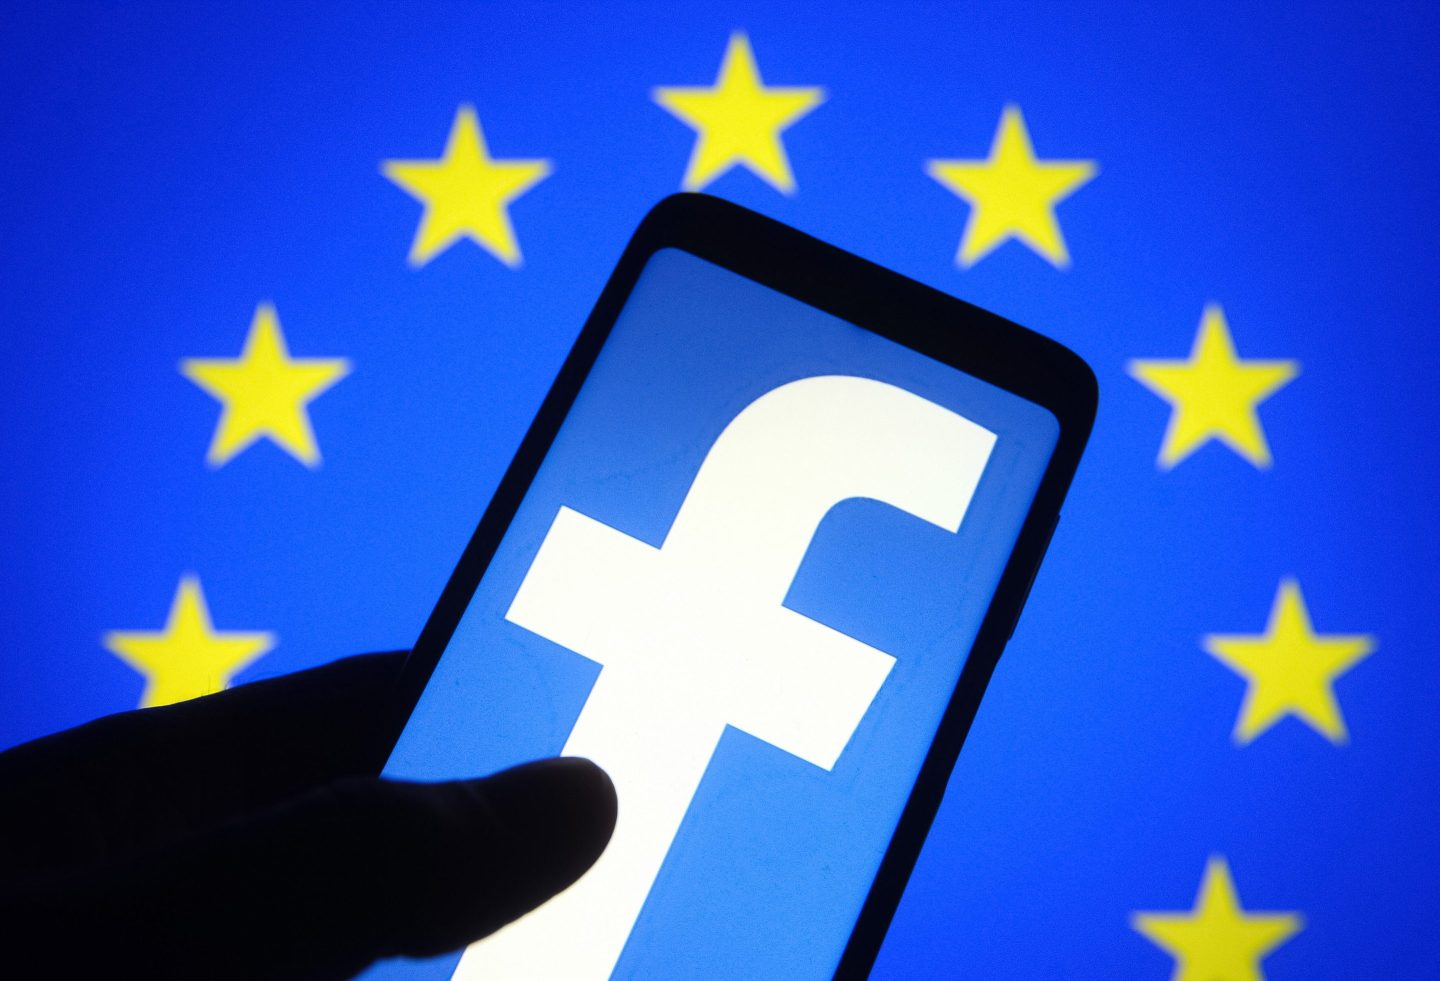 In this photo illustration, Facebook logo seen displayed on a smartphone screen and the European Union (EU) flag in the background.